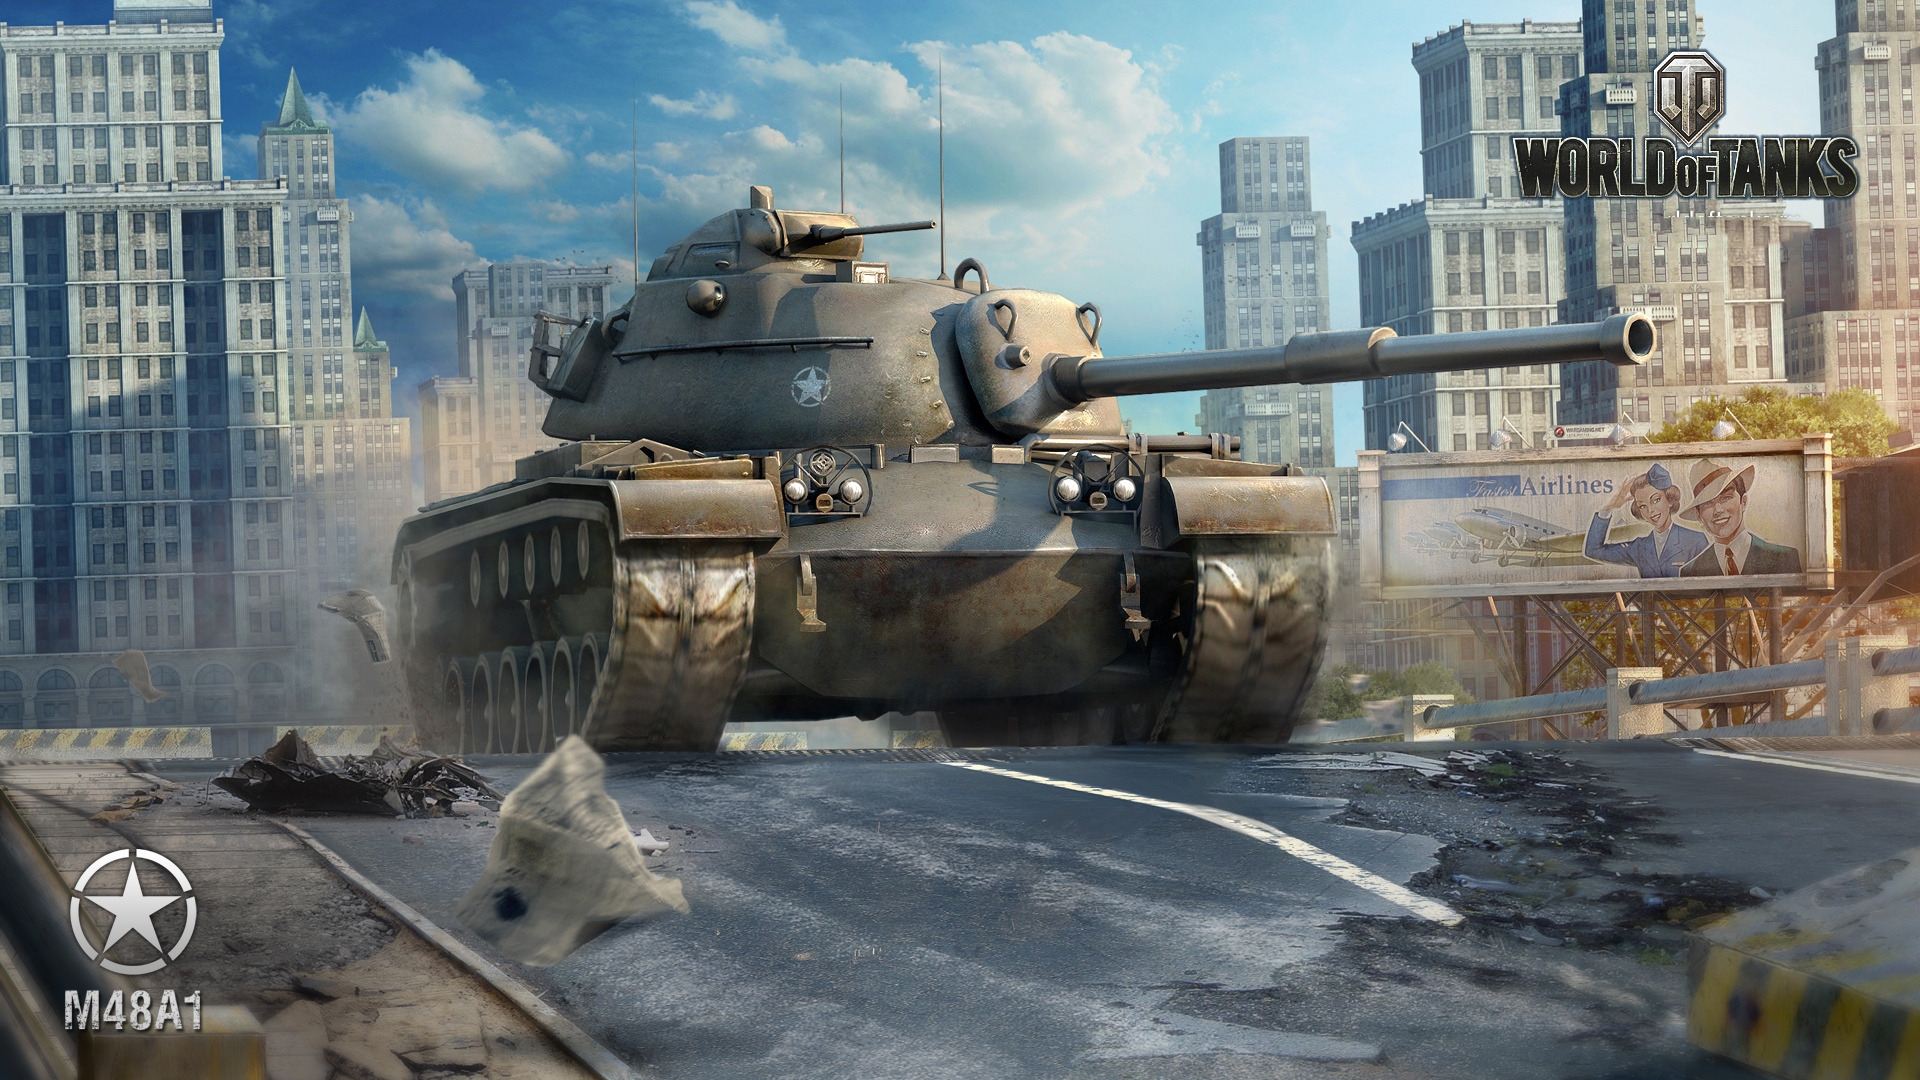 World of Tanks M48A1 for 1920 x 1080 HDTV 1080p resolution